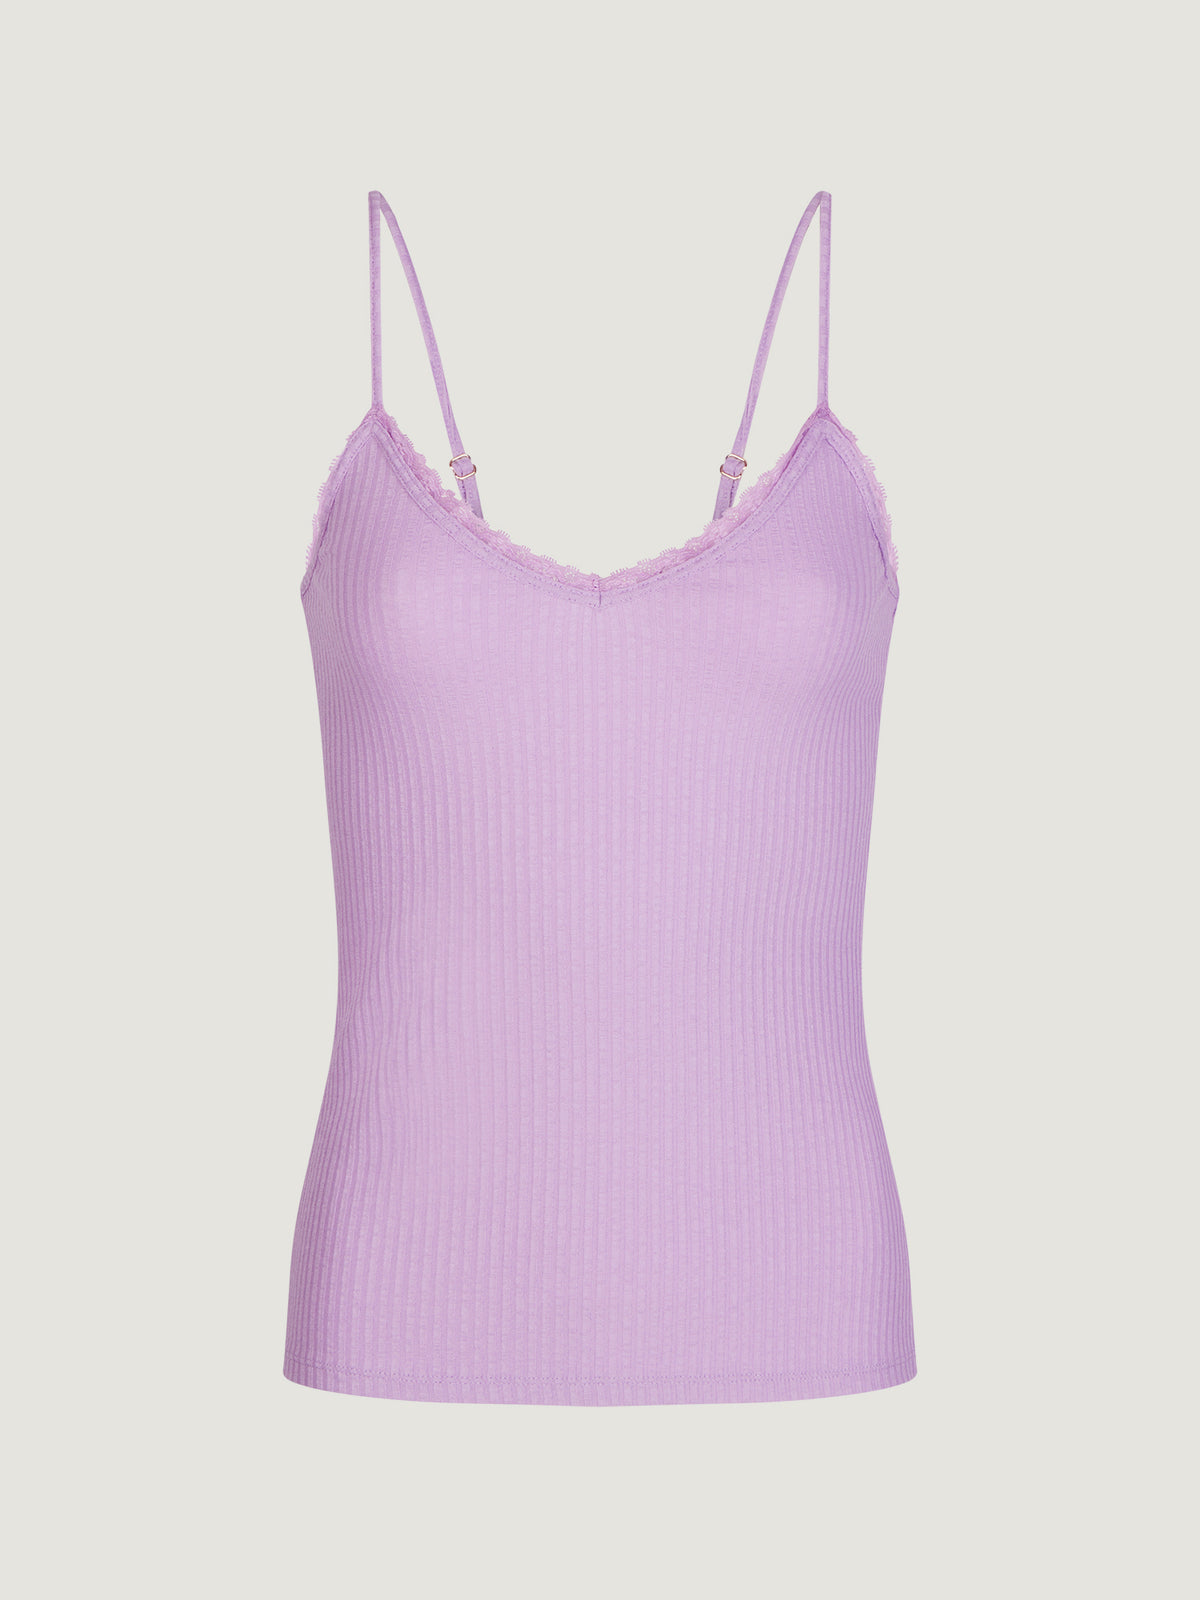 Lilac jersey top with thin straps